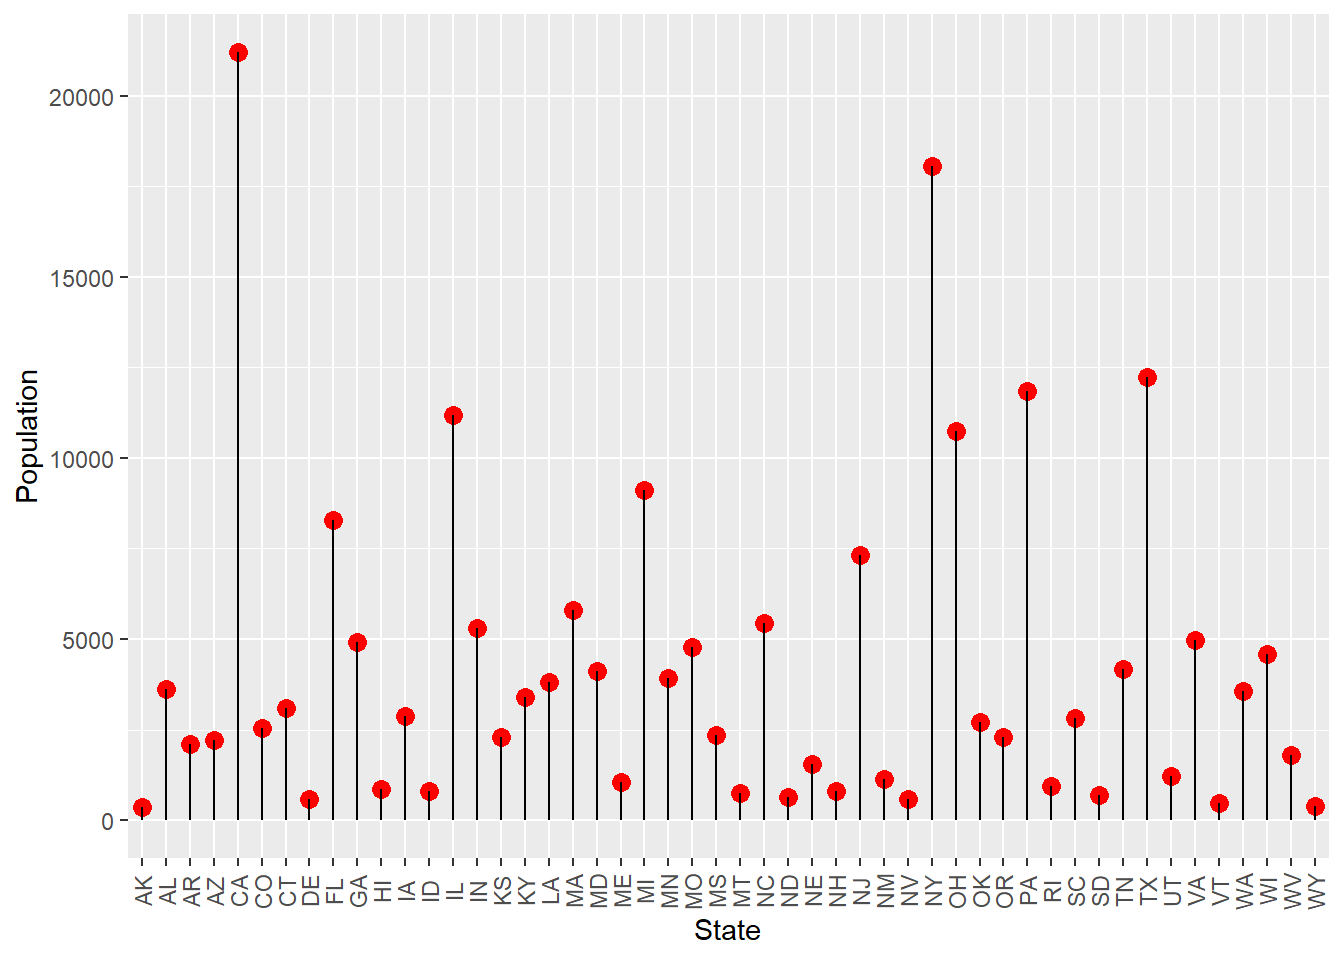 Loppipop plot of the population in each state.